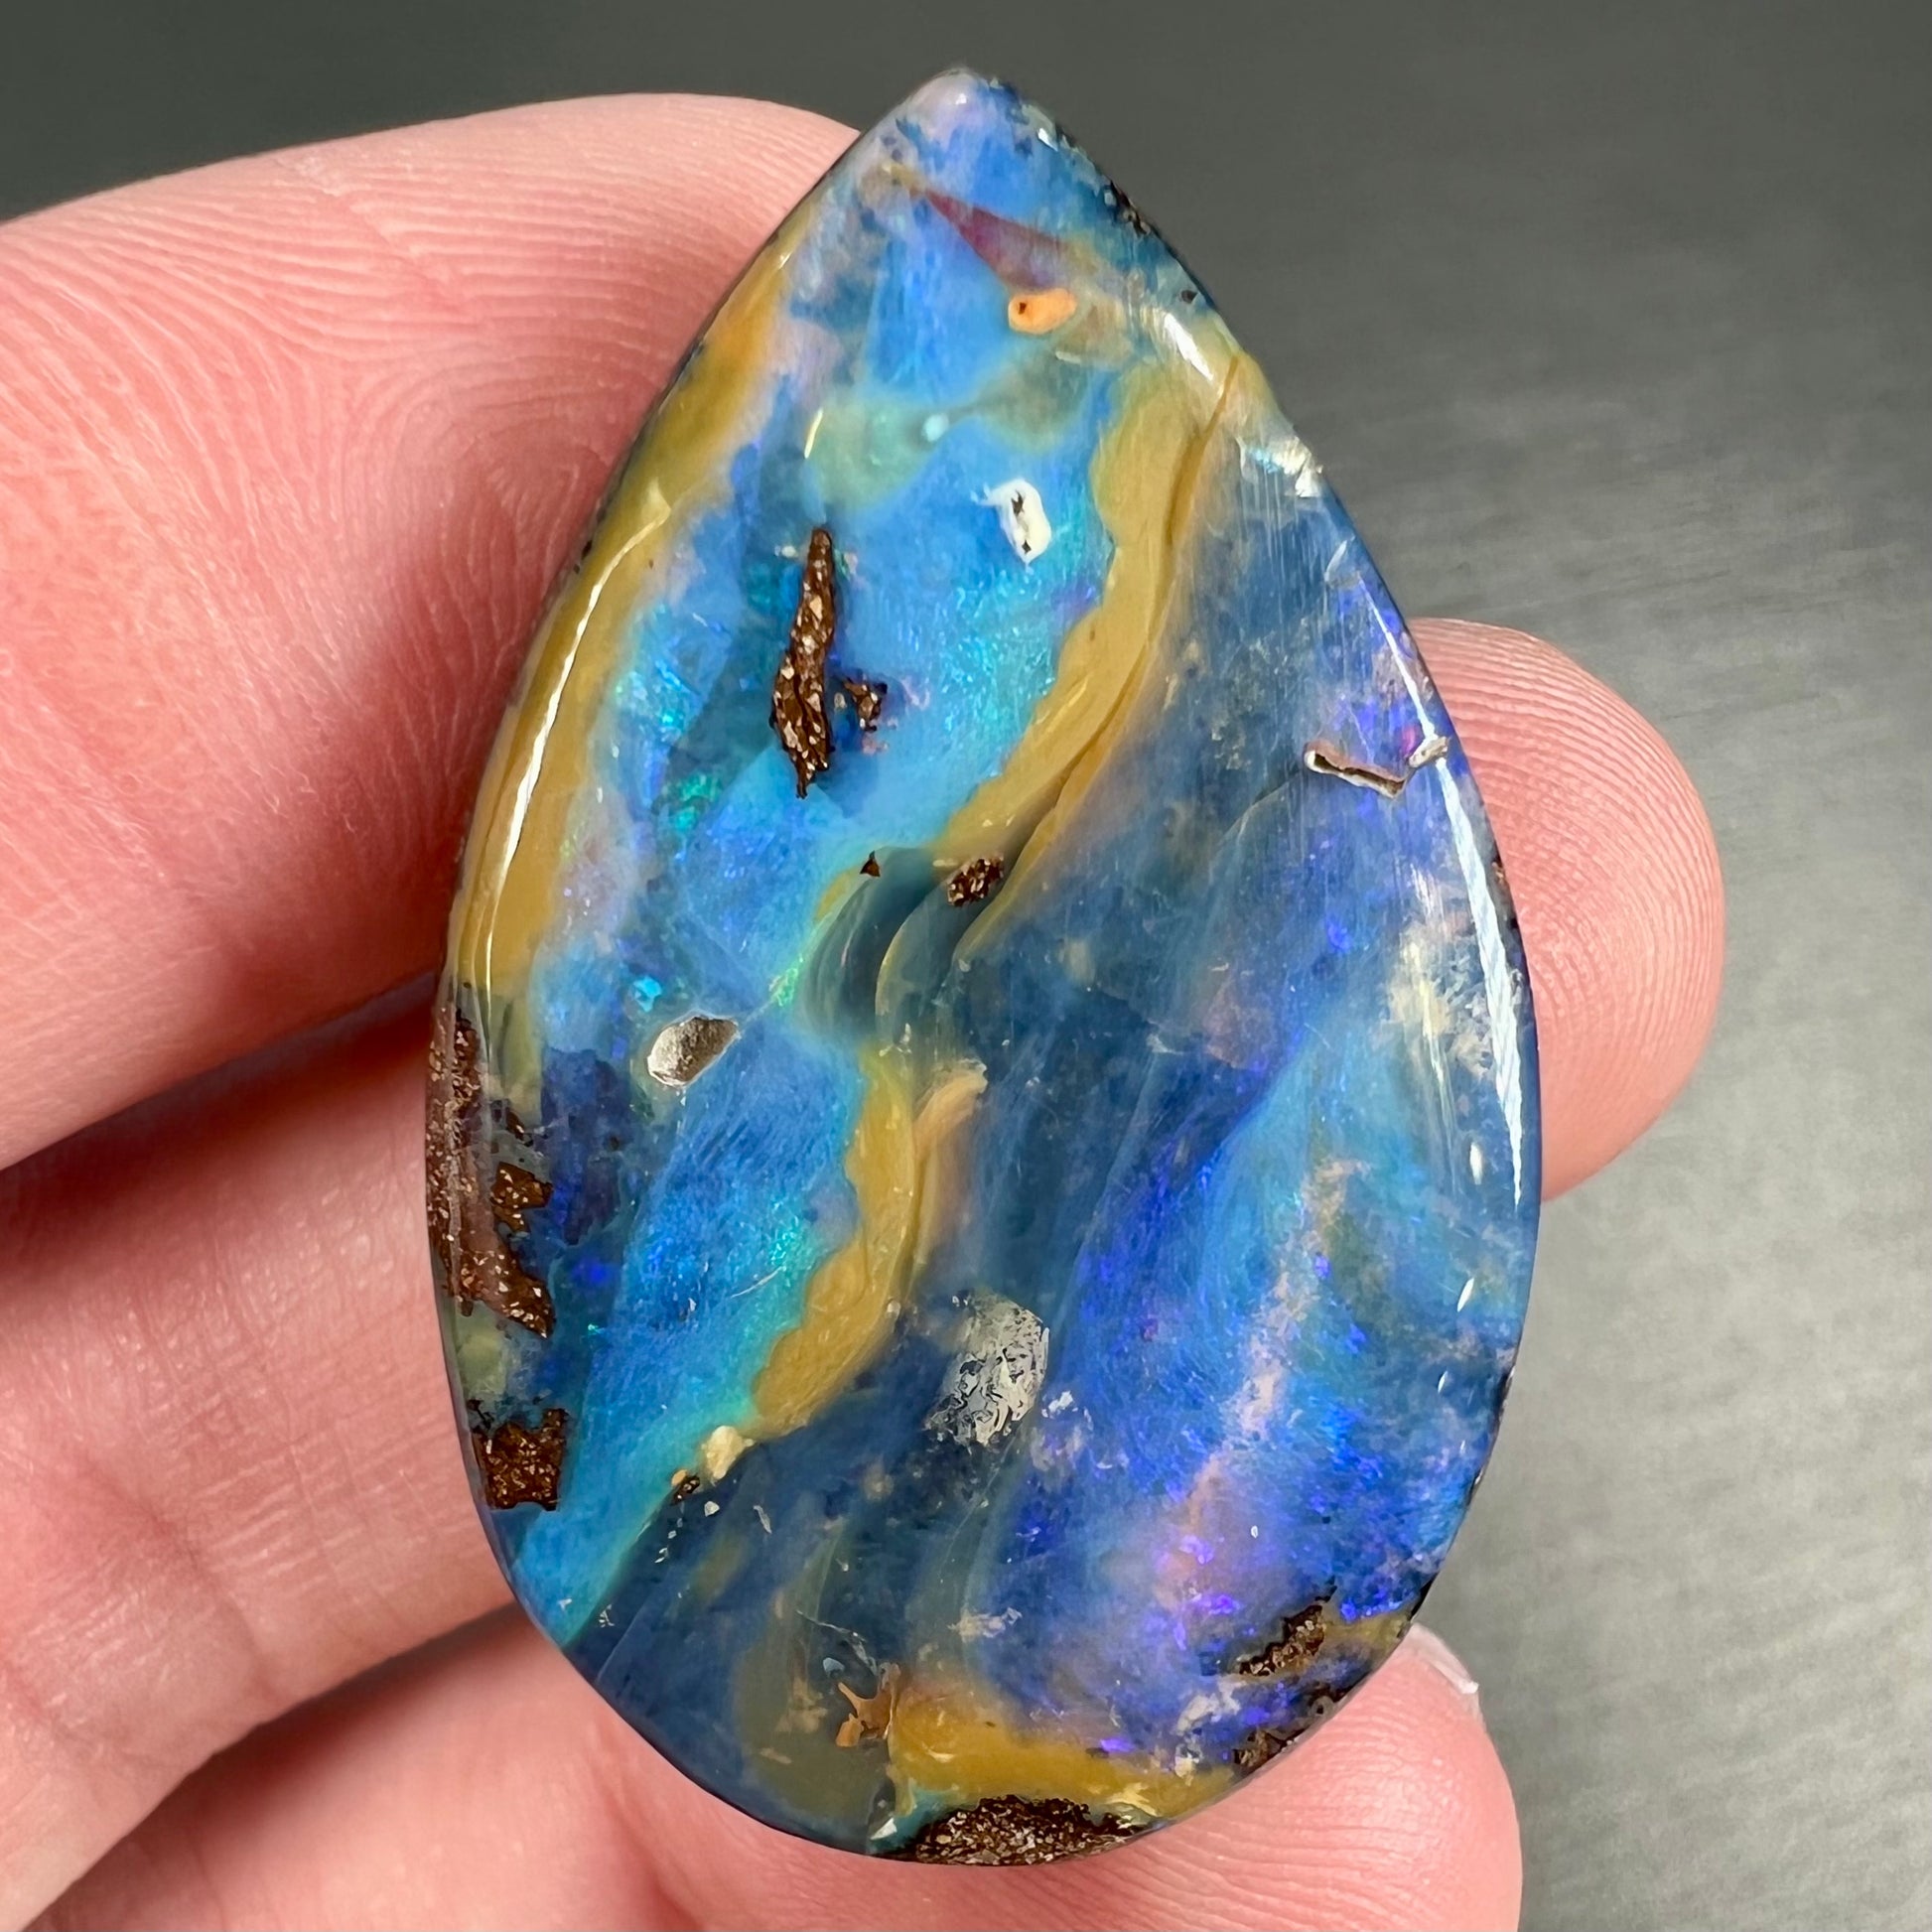 A loose, pear shaped cabochon cut boulder opal stone from Quilpie, Australia.